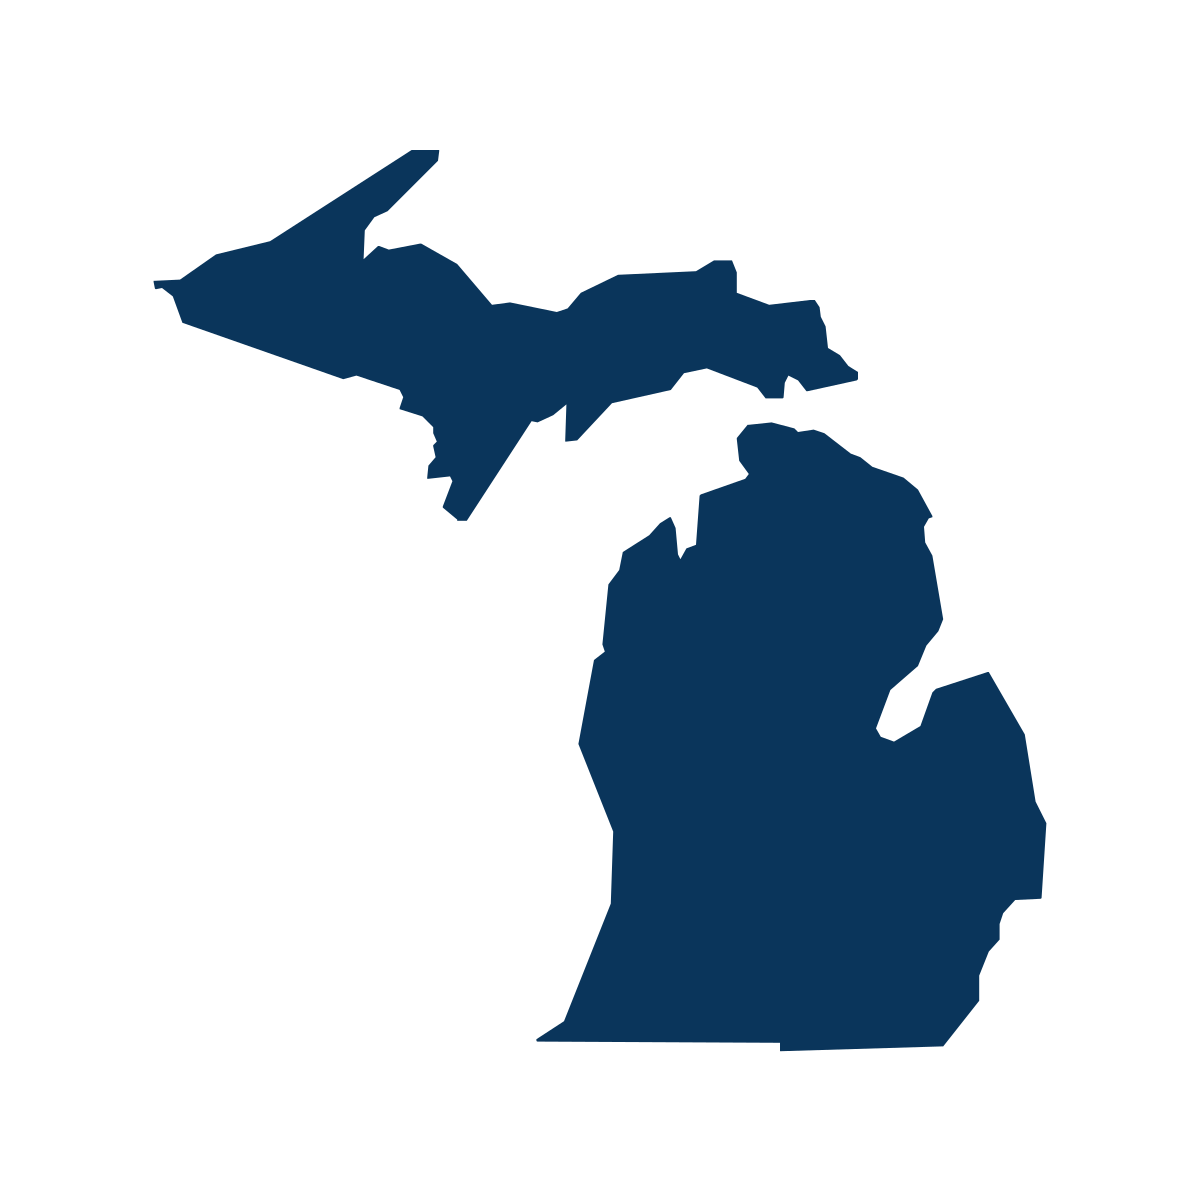 outline of the state of michigan